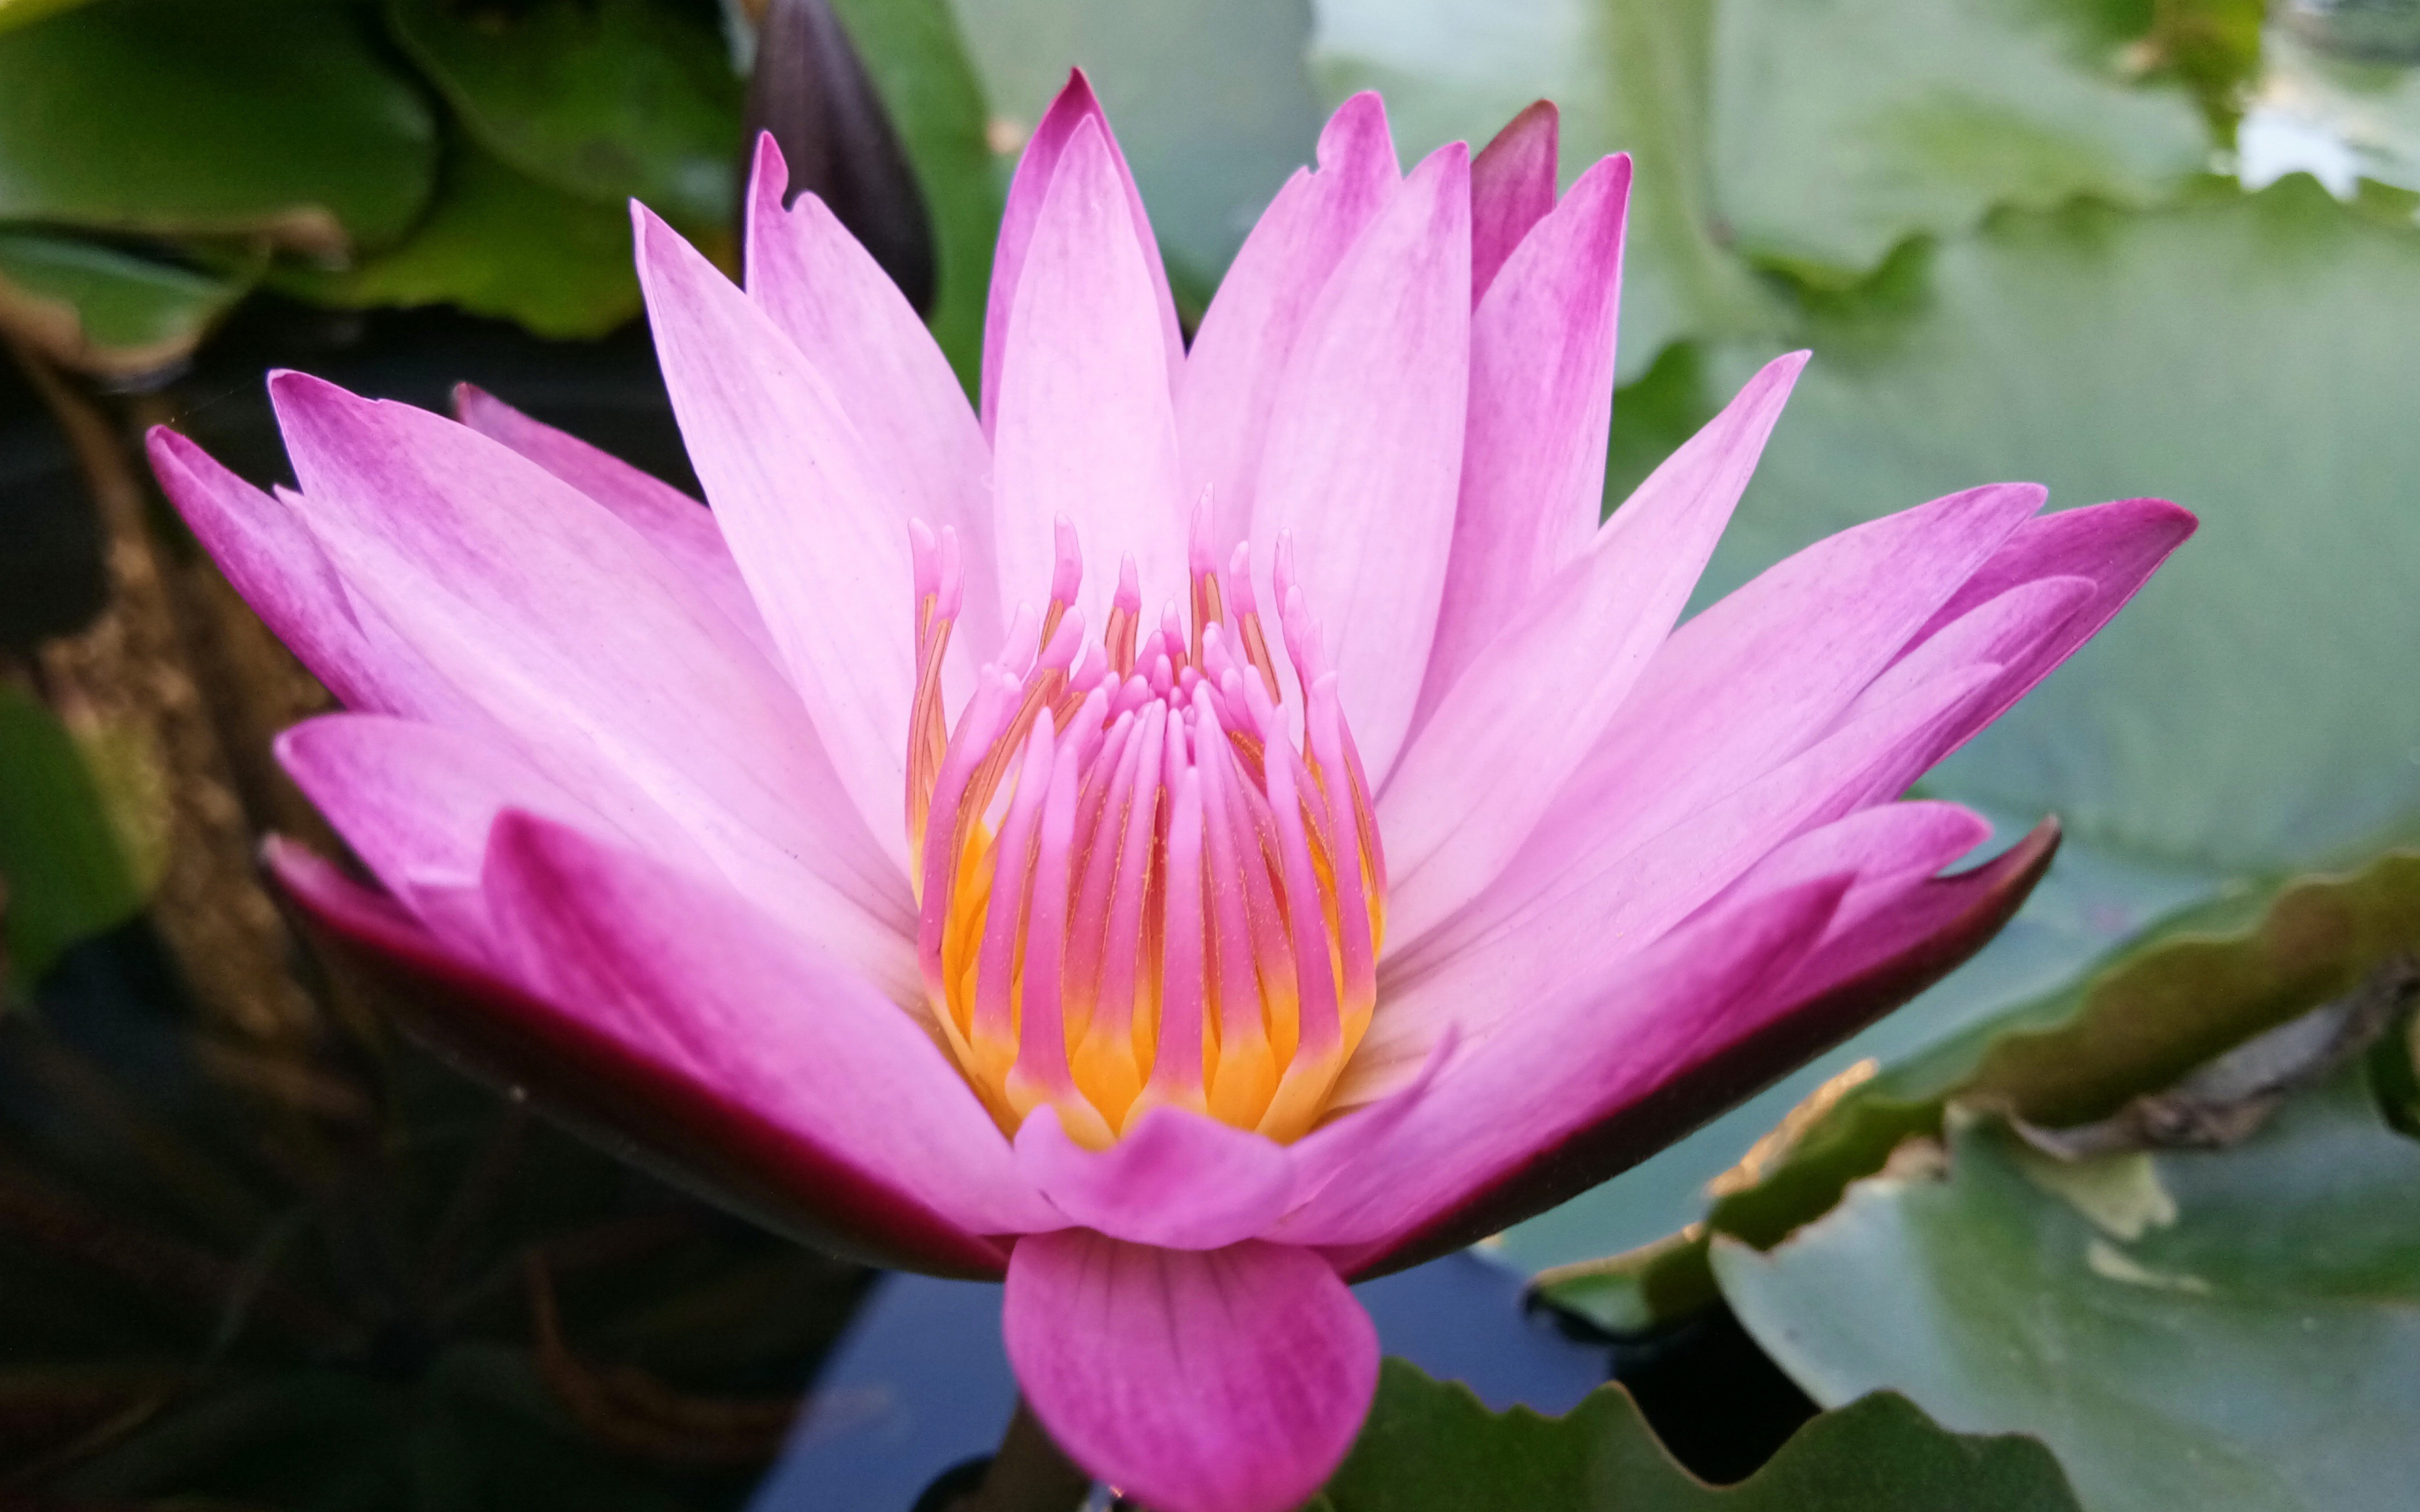 Water lily, pink flower, close up, 2880x1800 wallpaper